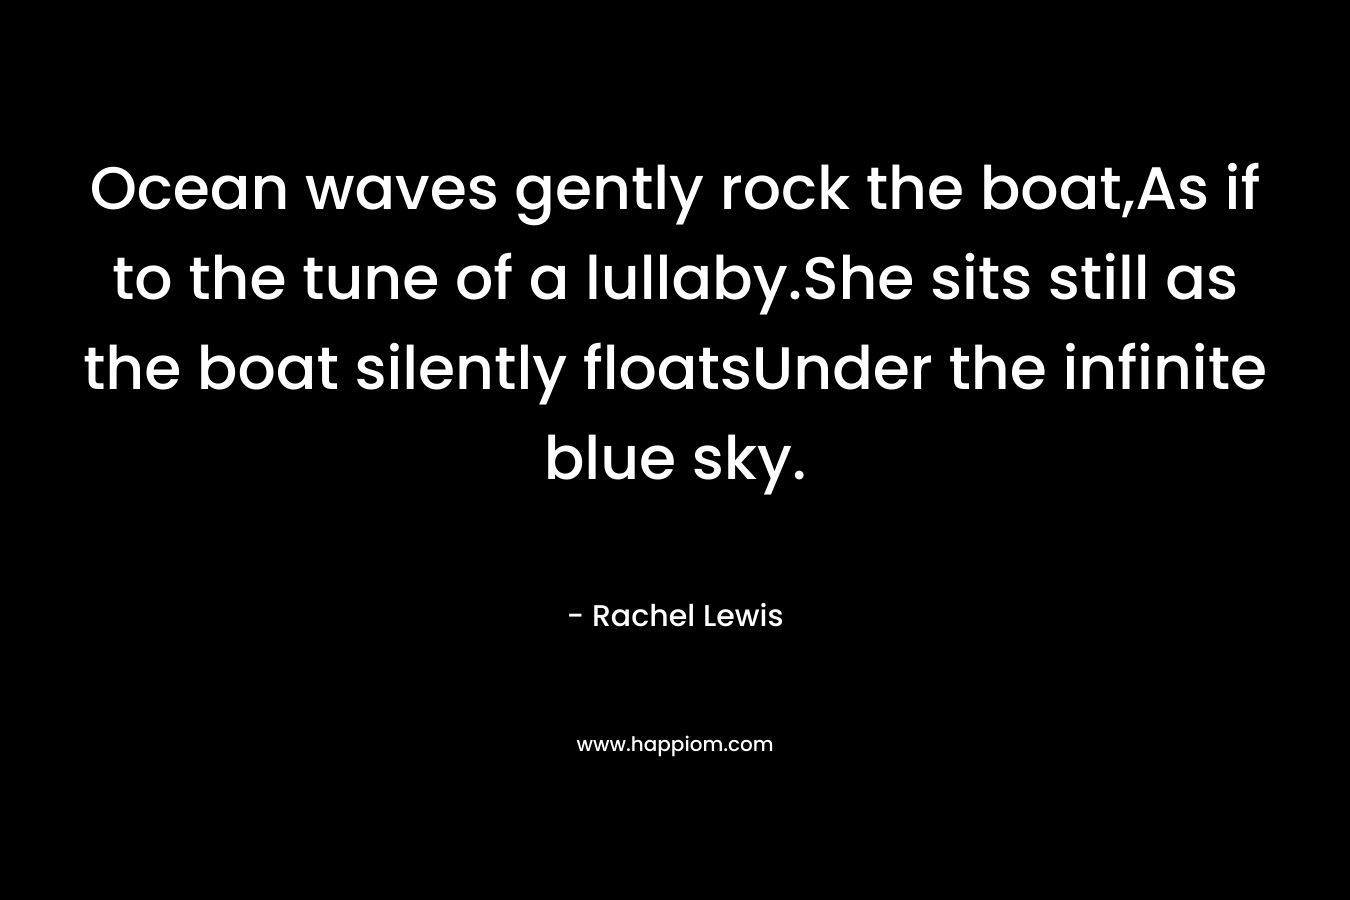 Ocean waves gently rock the boat,As if to the tune of a lullaby.She sits still as the boat silently floatsUnder the infinite blue sky.